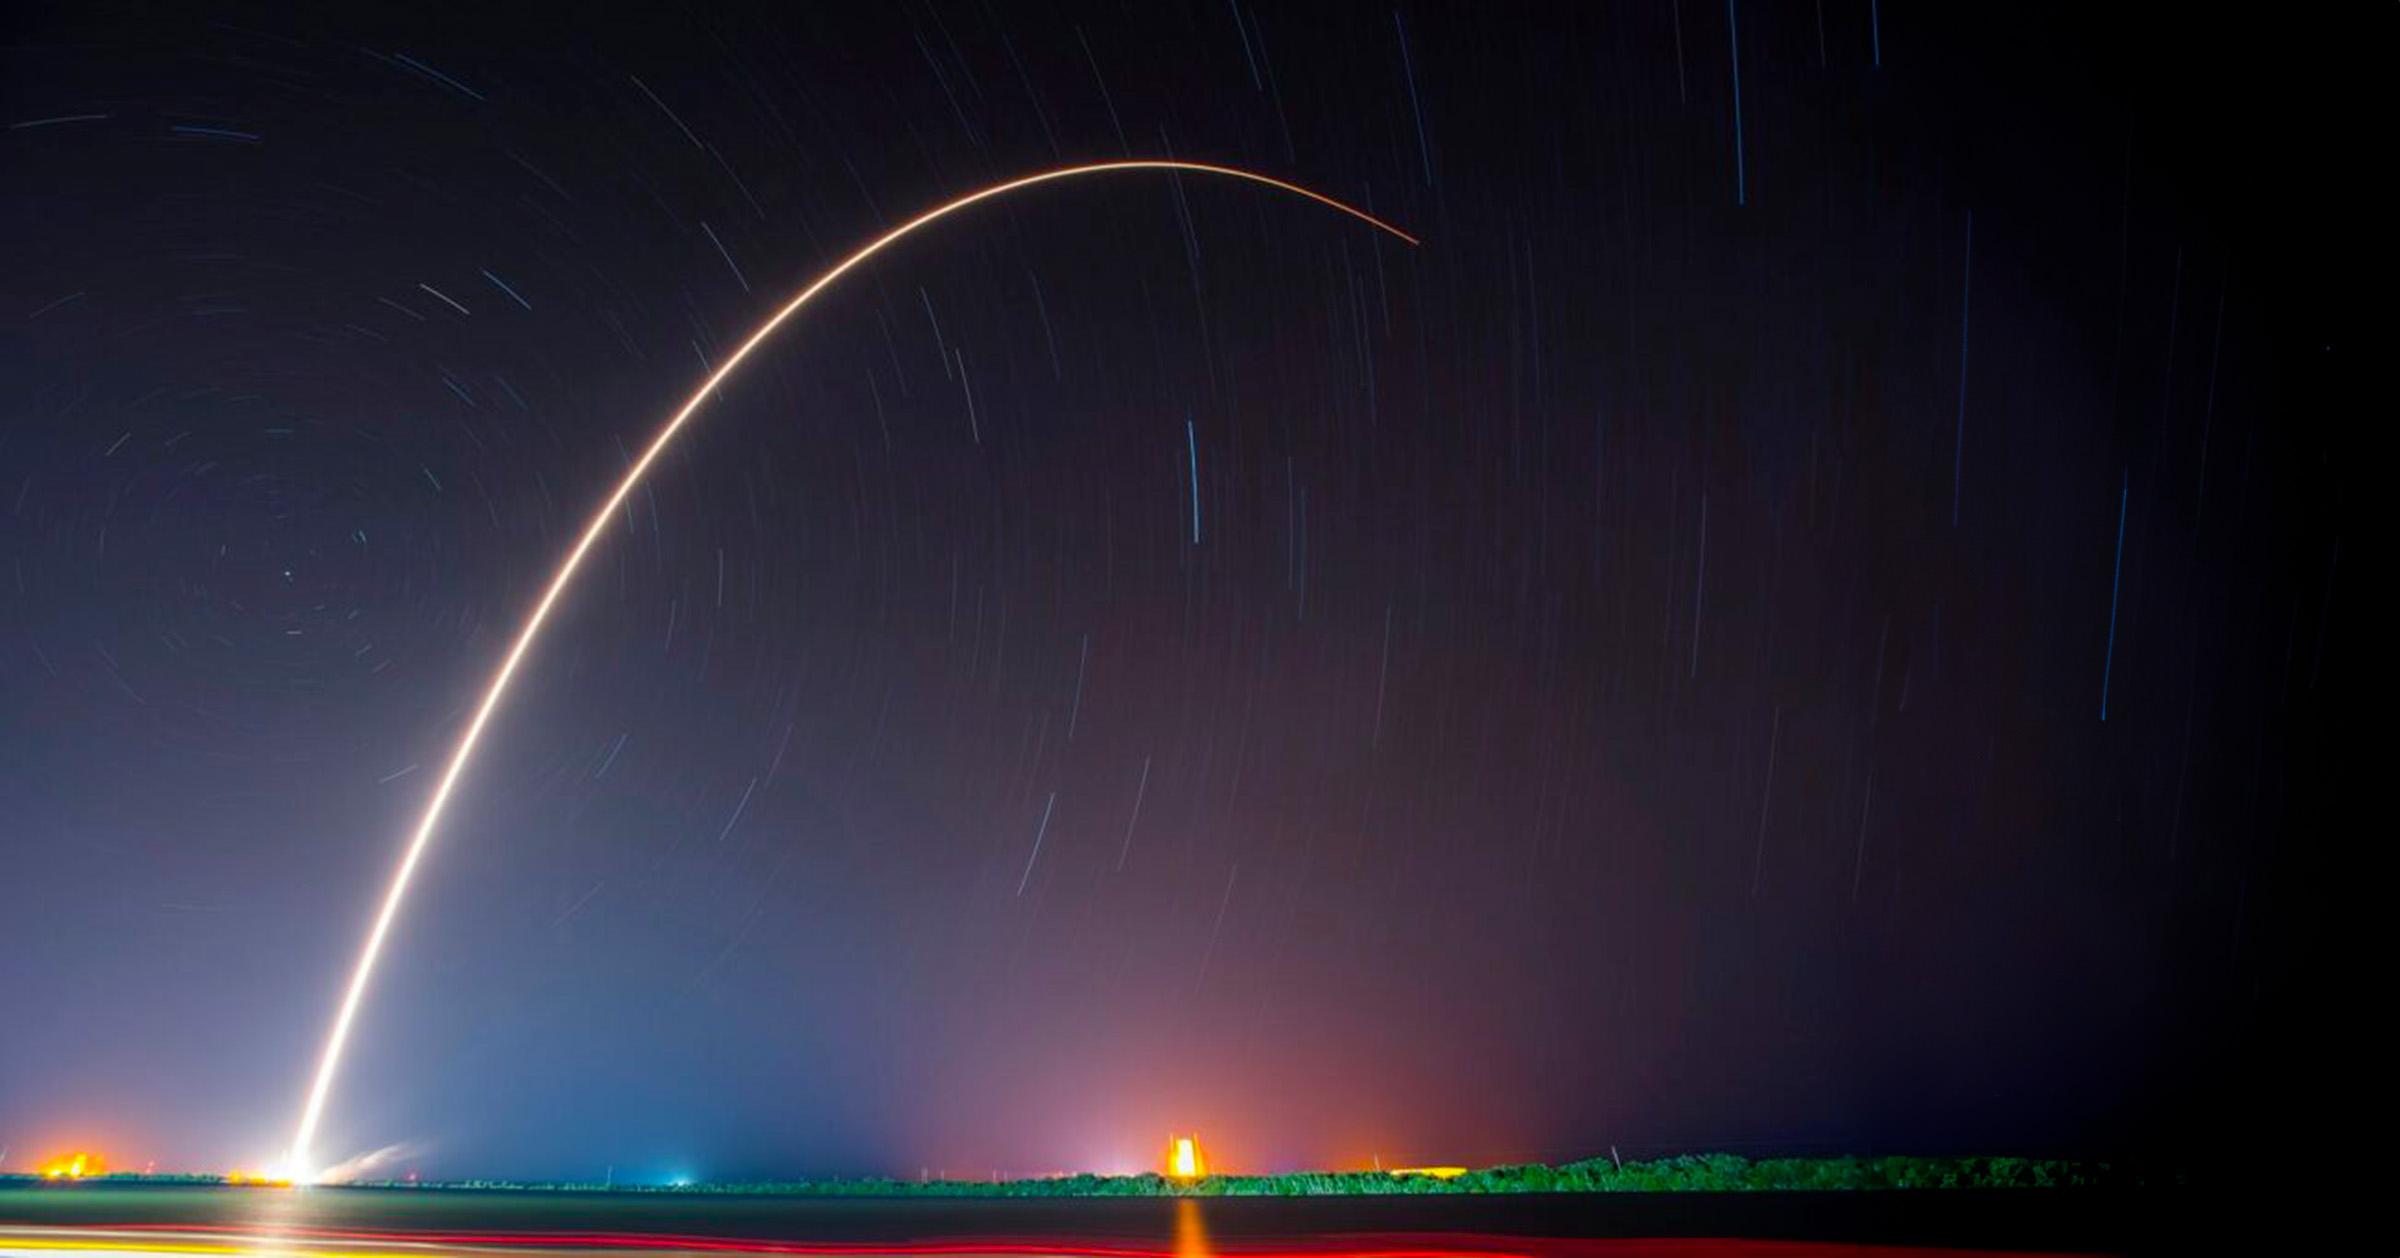 A night sky with stars streaking in the background and a streak of a rocket trailing in a large arc.